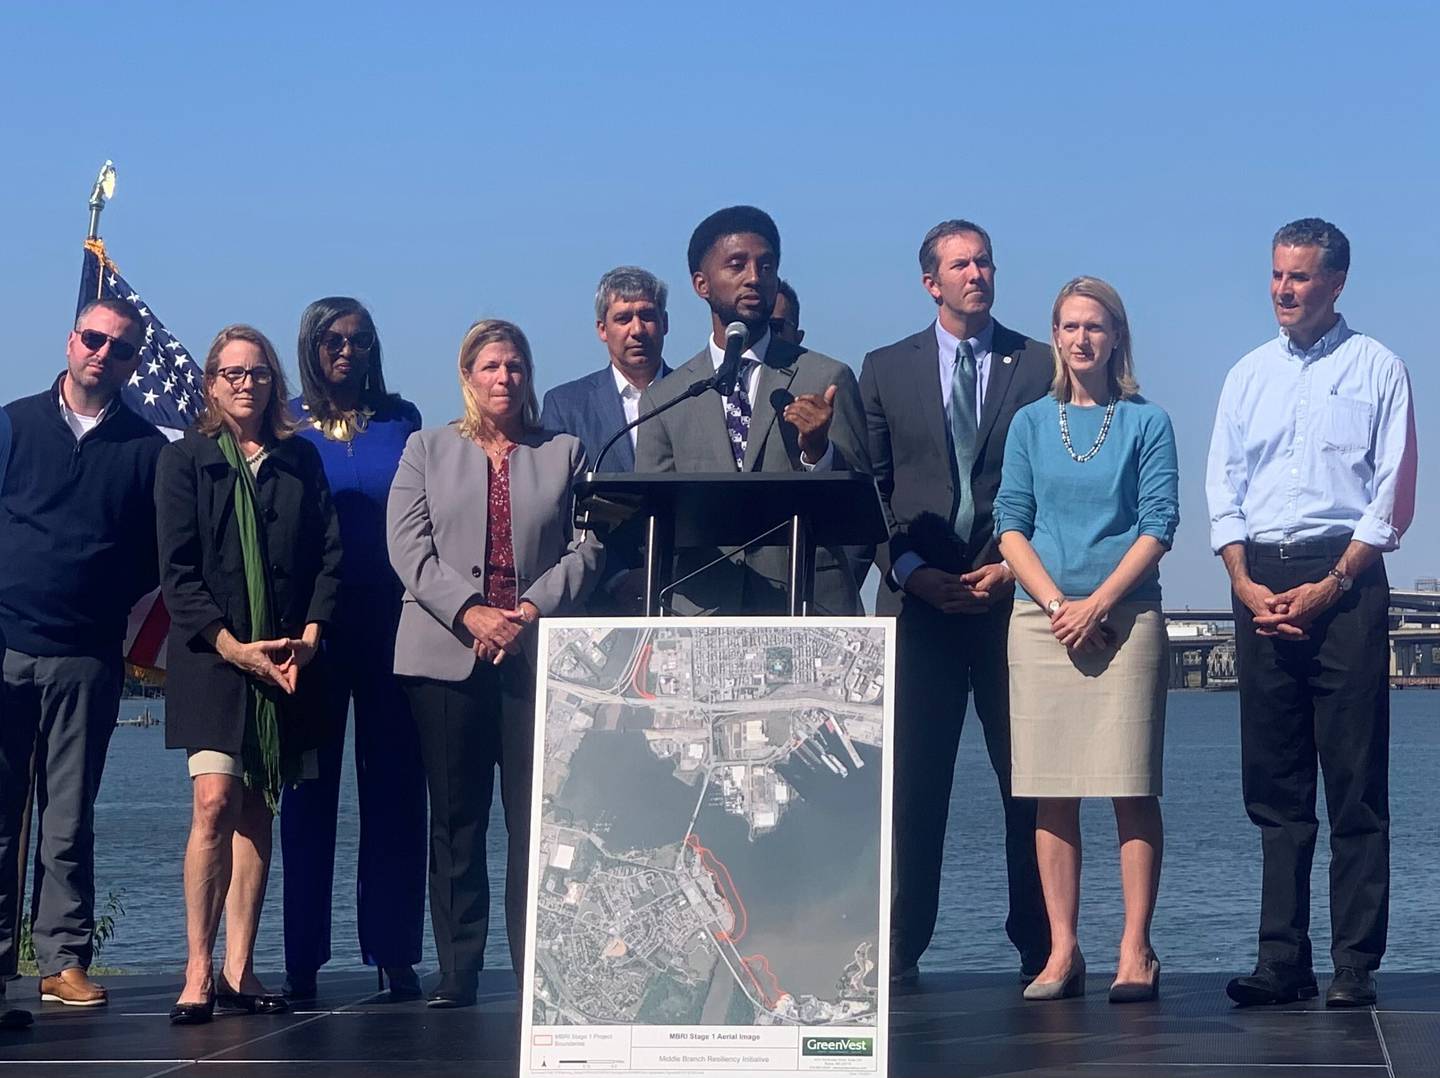 Baltimore Mayor Brandon Scott stands at a lectern with elected officials behind him. In the background is the Middle Branch of the Patapsco River.